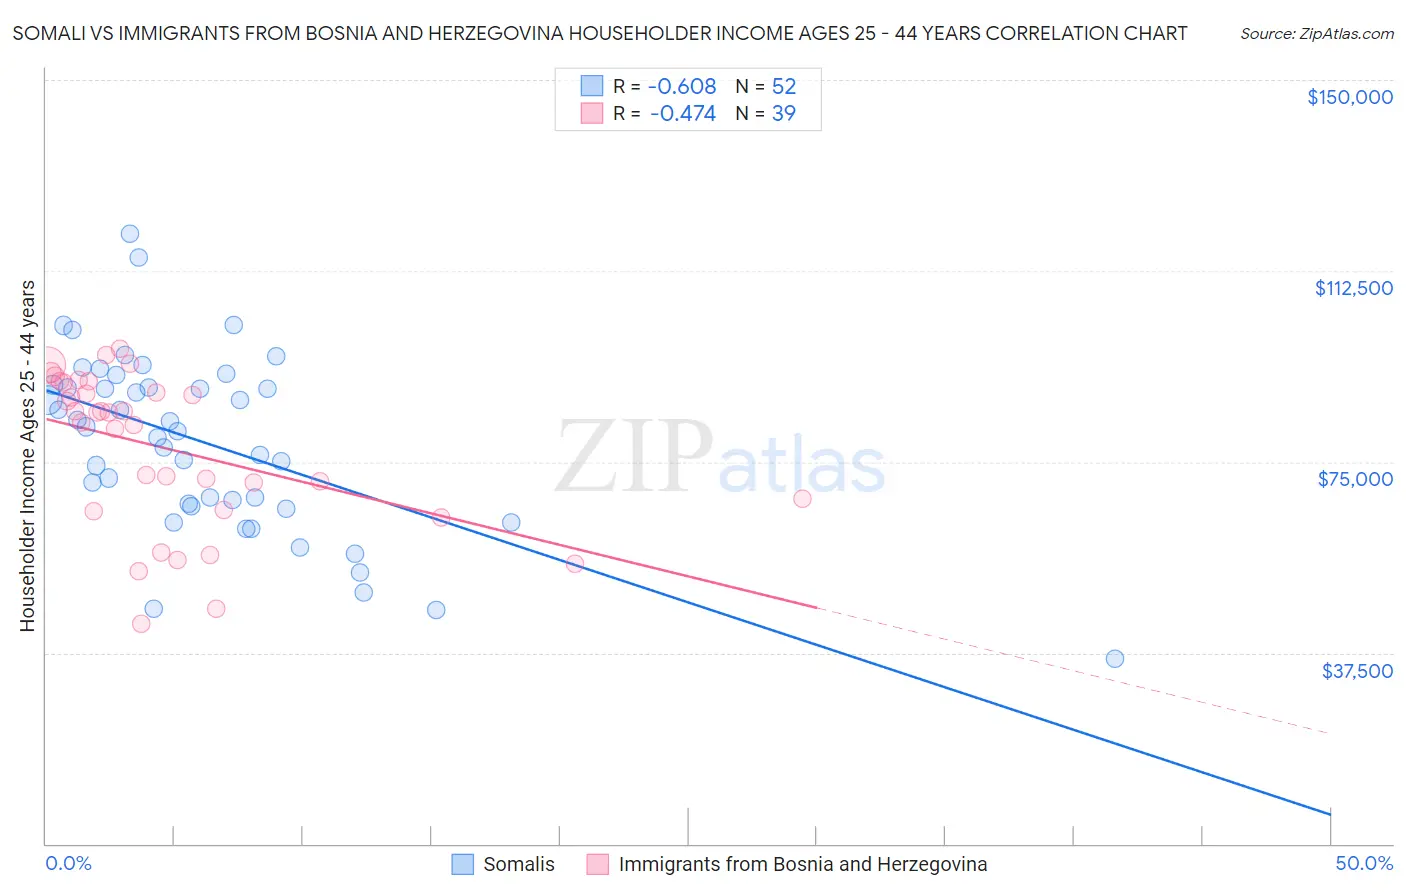 Somali vs Immigrants from Bosnia and Herzegovina Householder Income Ages 25 - 44 years